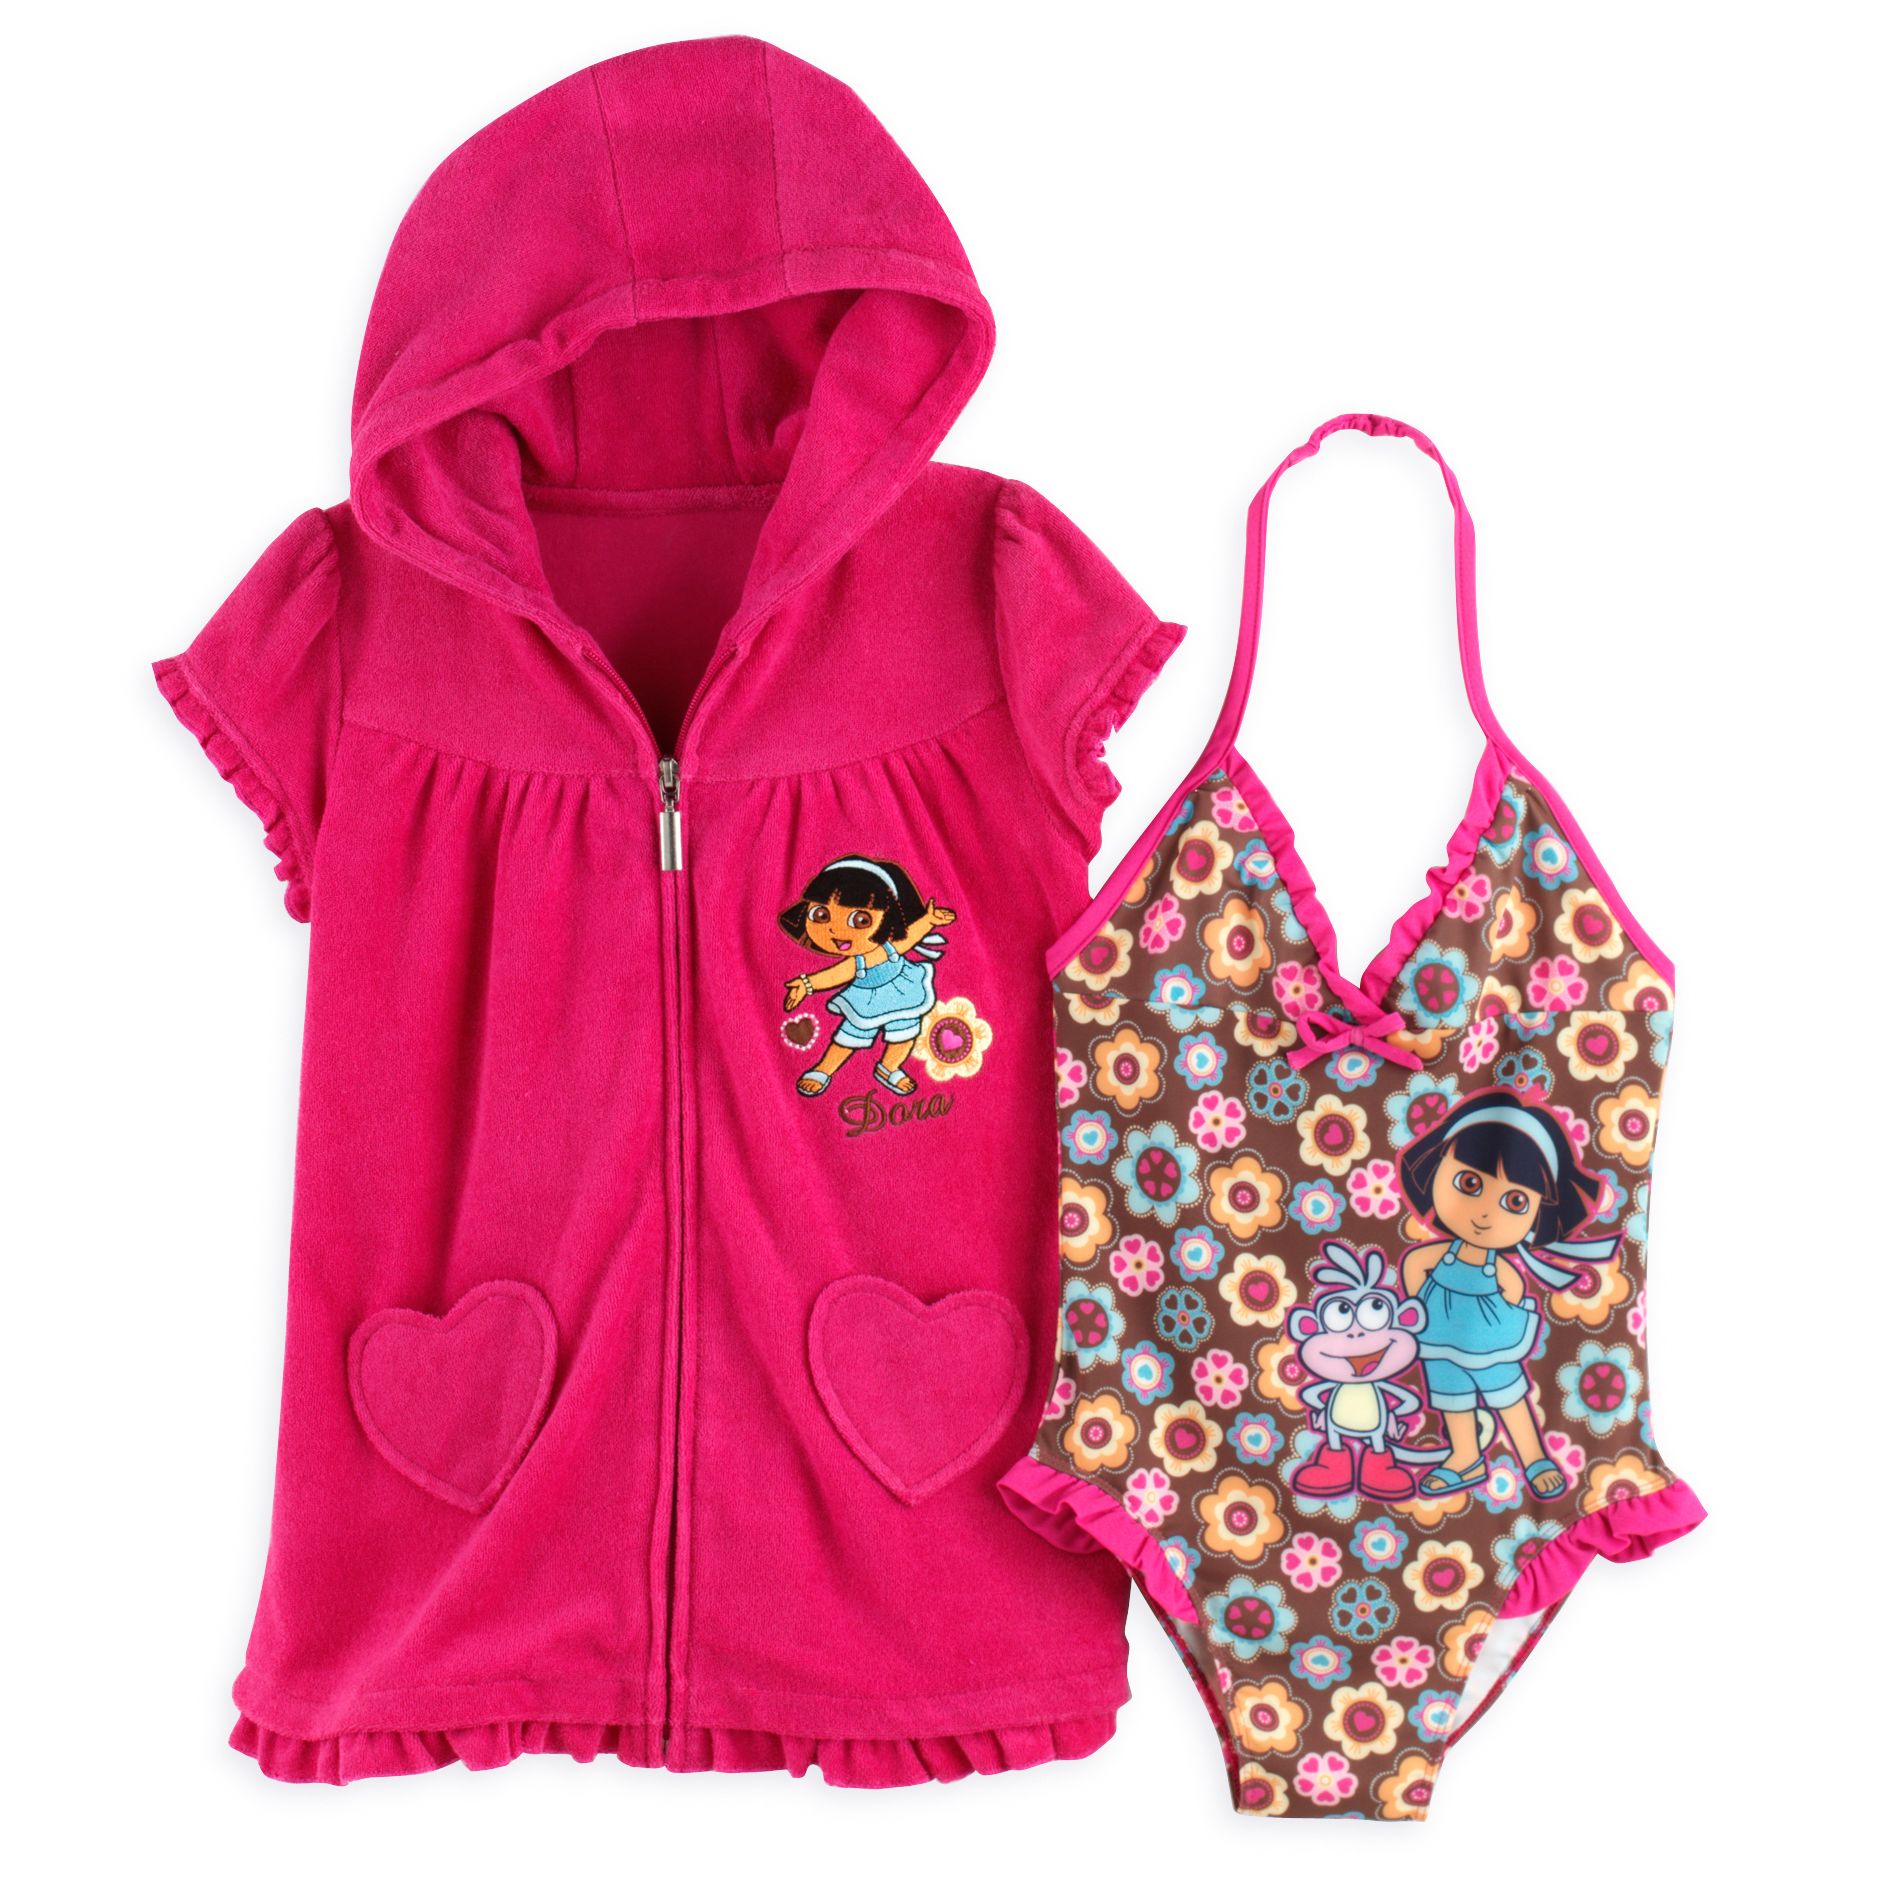 Dora The Explorer Girl&#39;s 4-6x Floral Print Swimsuit with Terry Cover Up